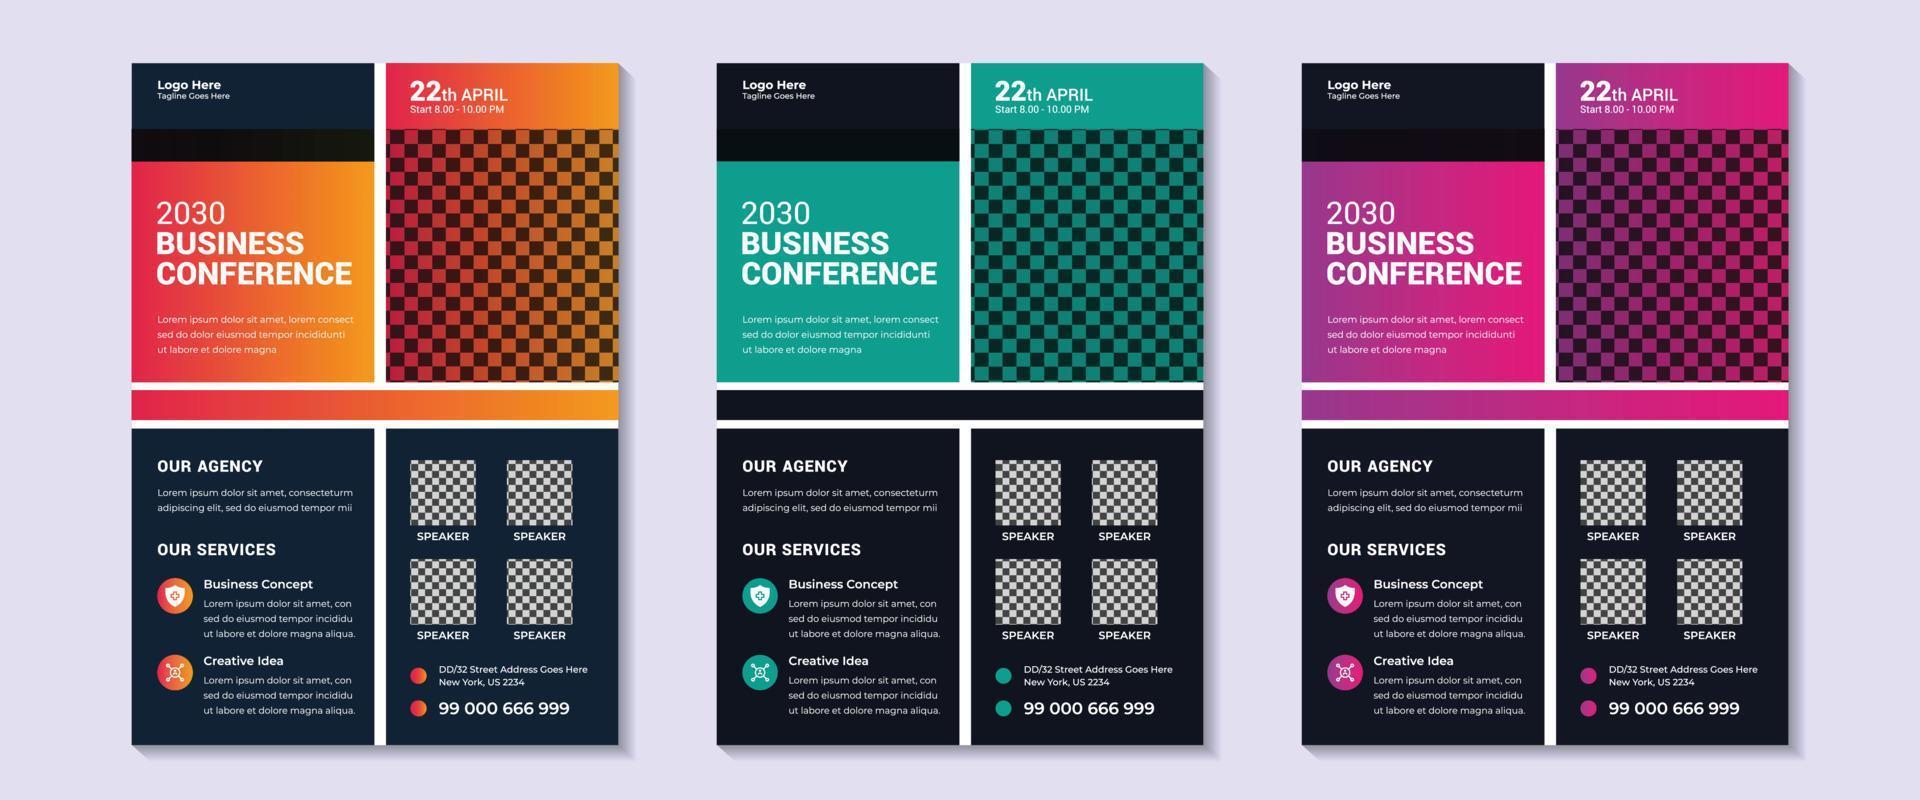 Corporate Business Conference poster and flyer design layout template in A4 size. Corporate Business Conference live meeting and flyer design layout template. vector illustration.